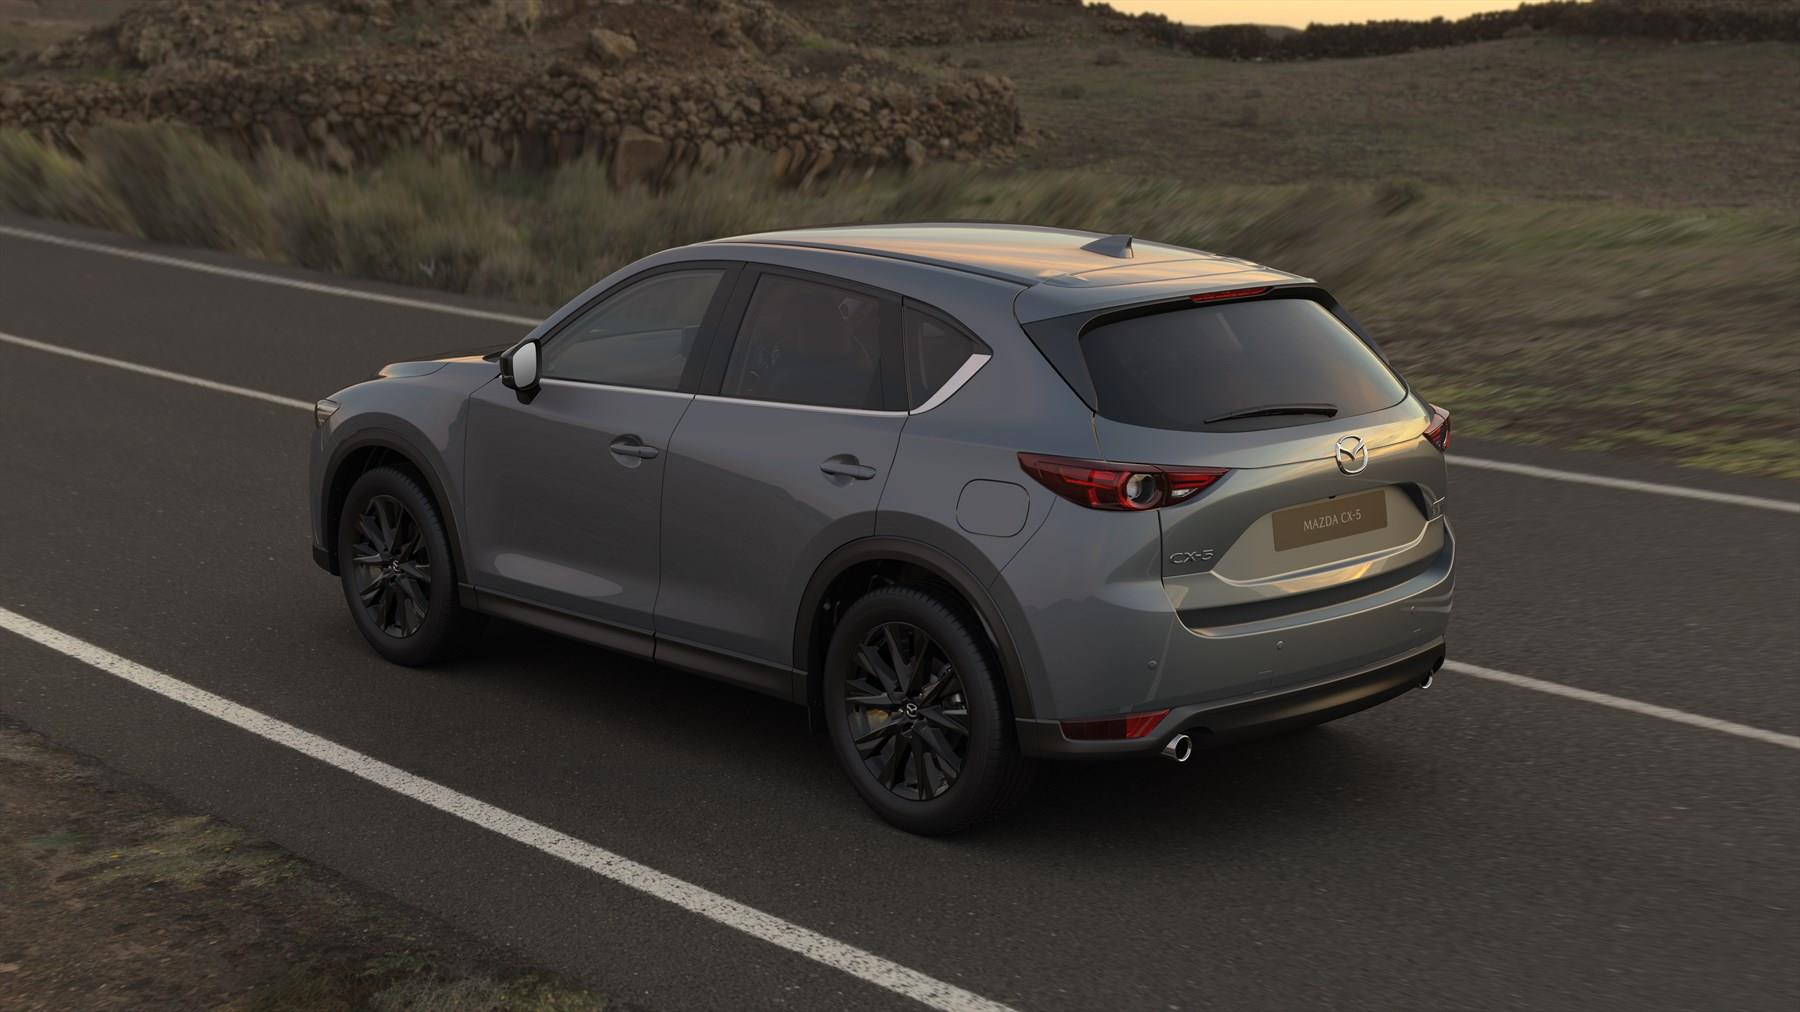 how much are car repayments on a new mazda cx-5?